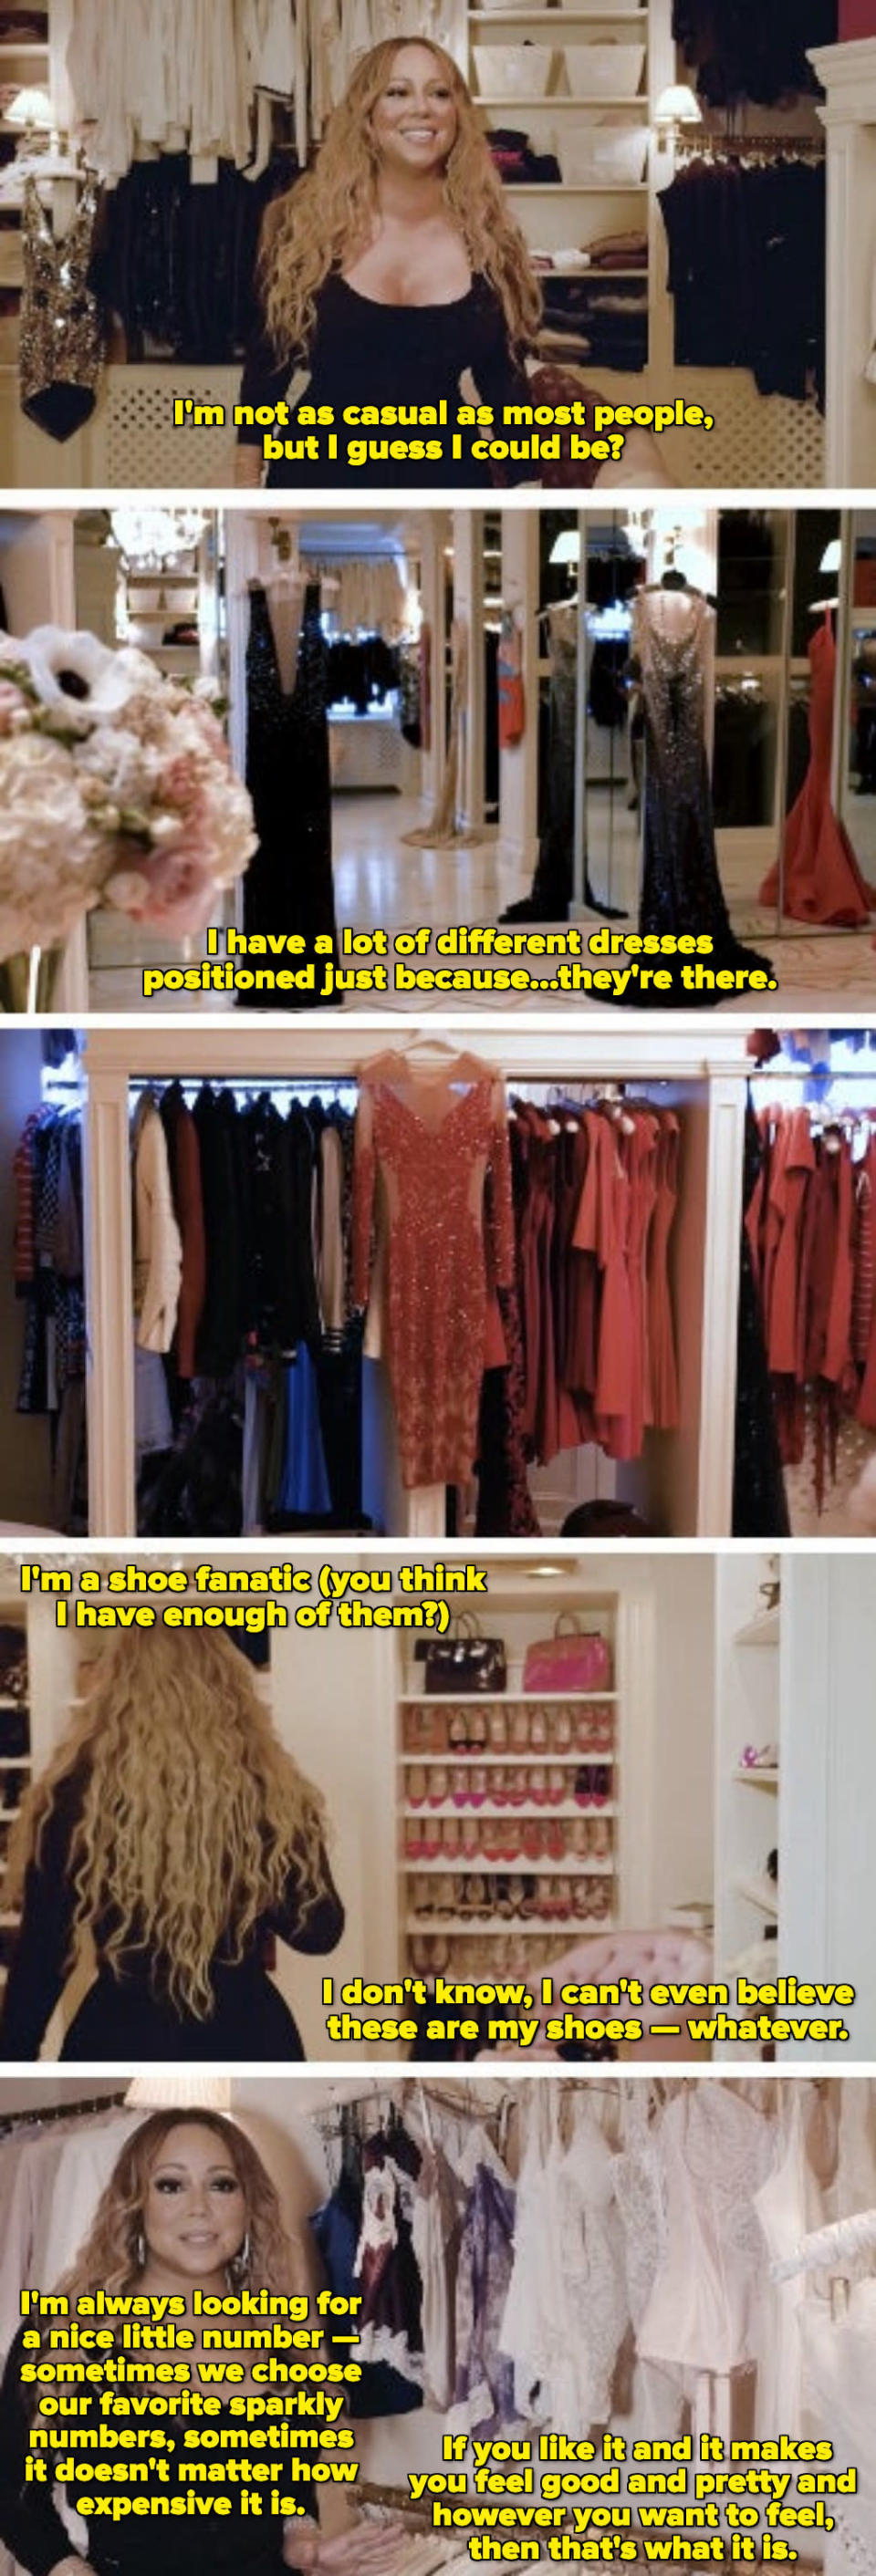 Carey giving a tour of her giant, multi-room closet